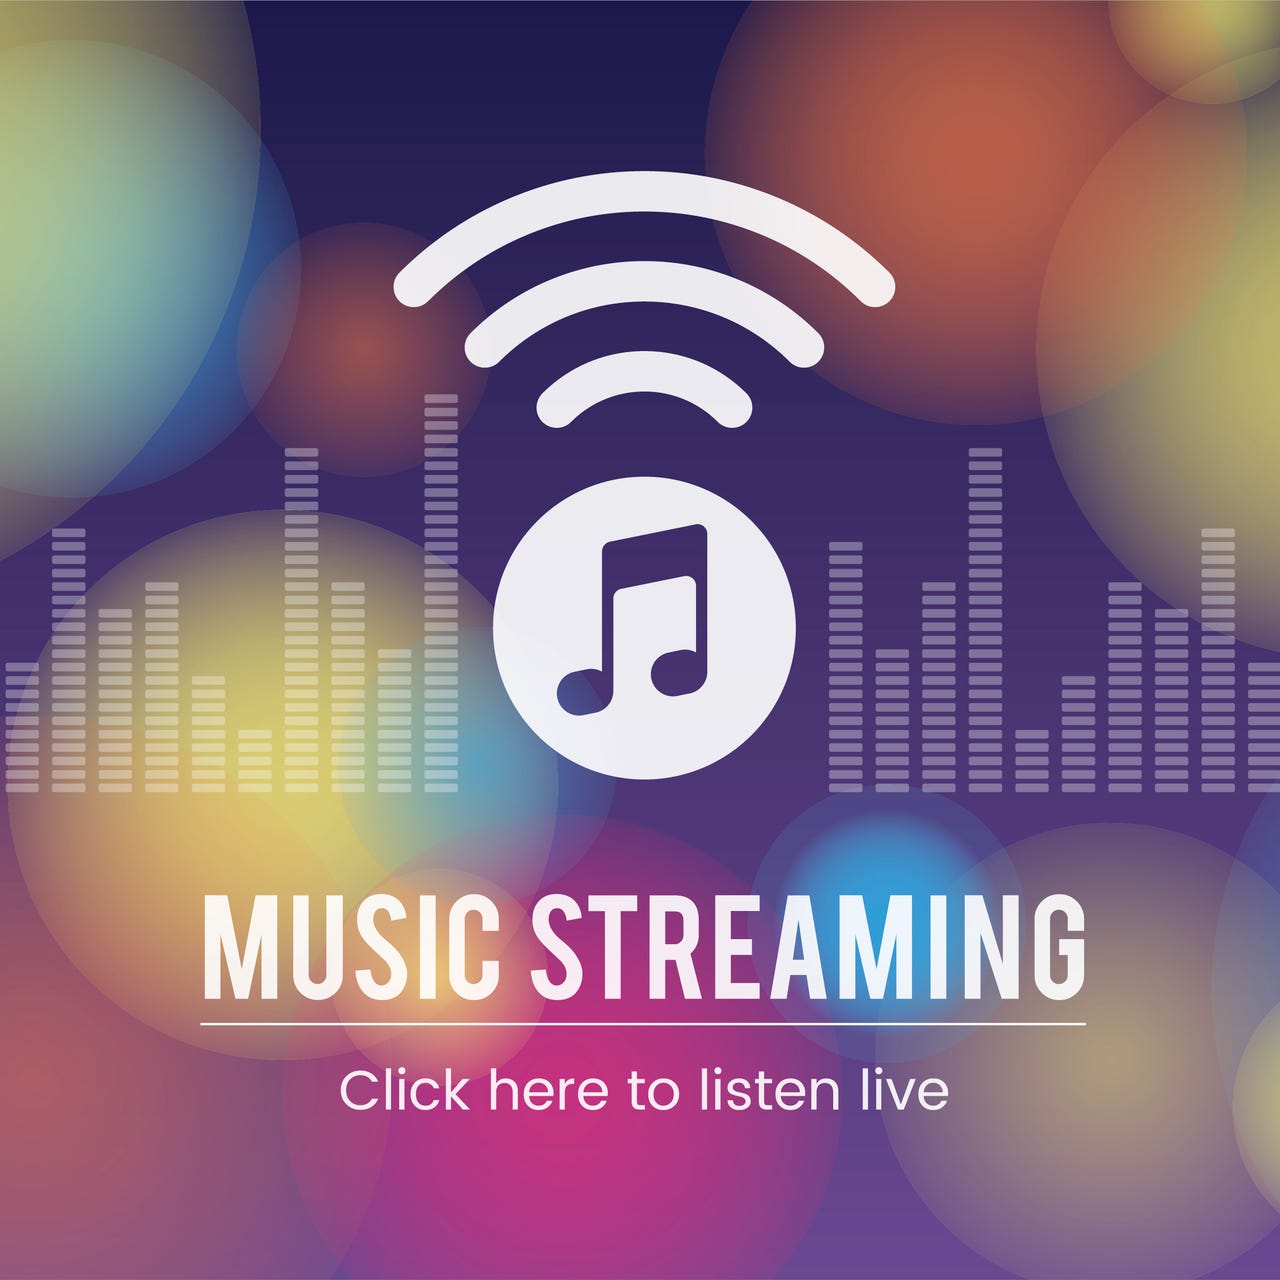 Stream hshd music  Listen to songs, albums, playlists for free on